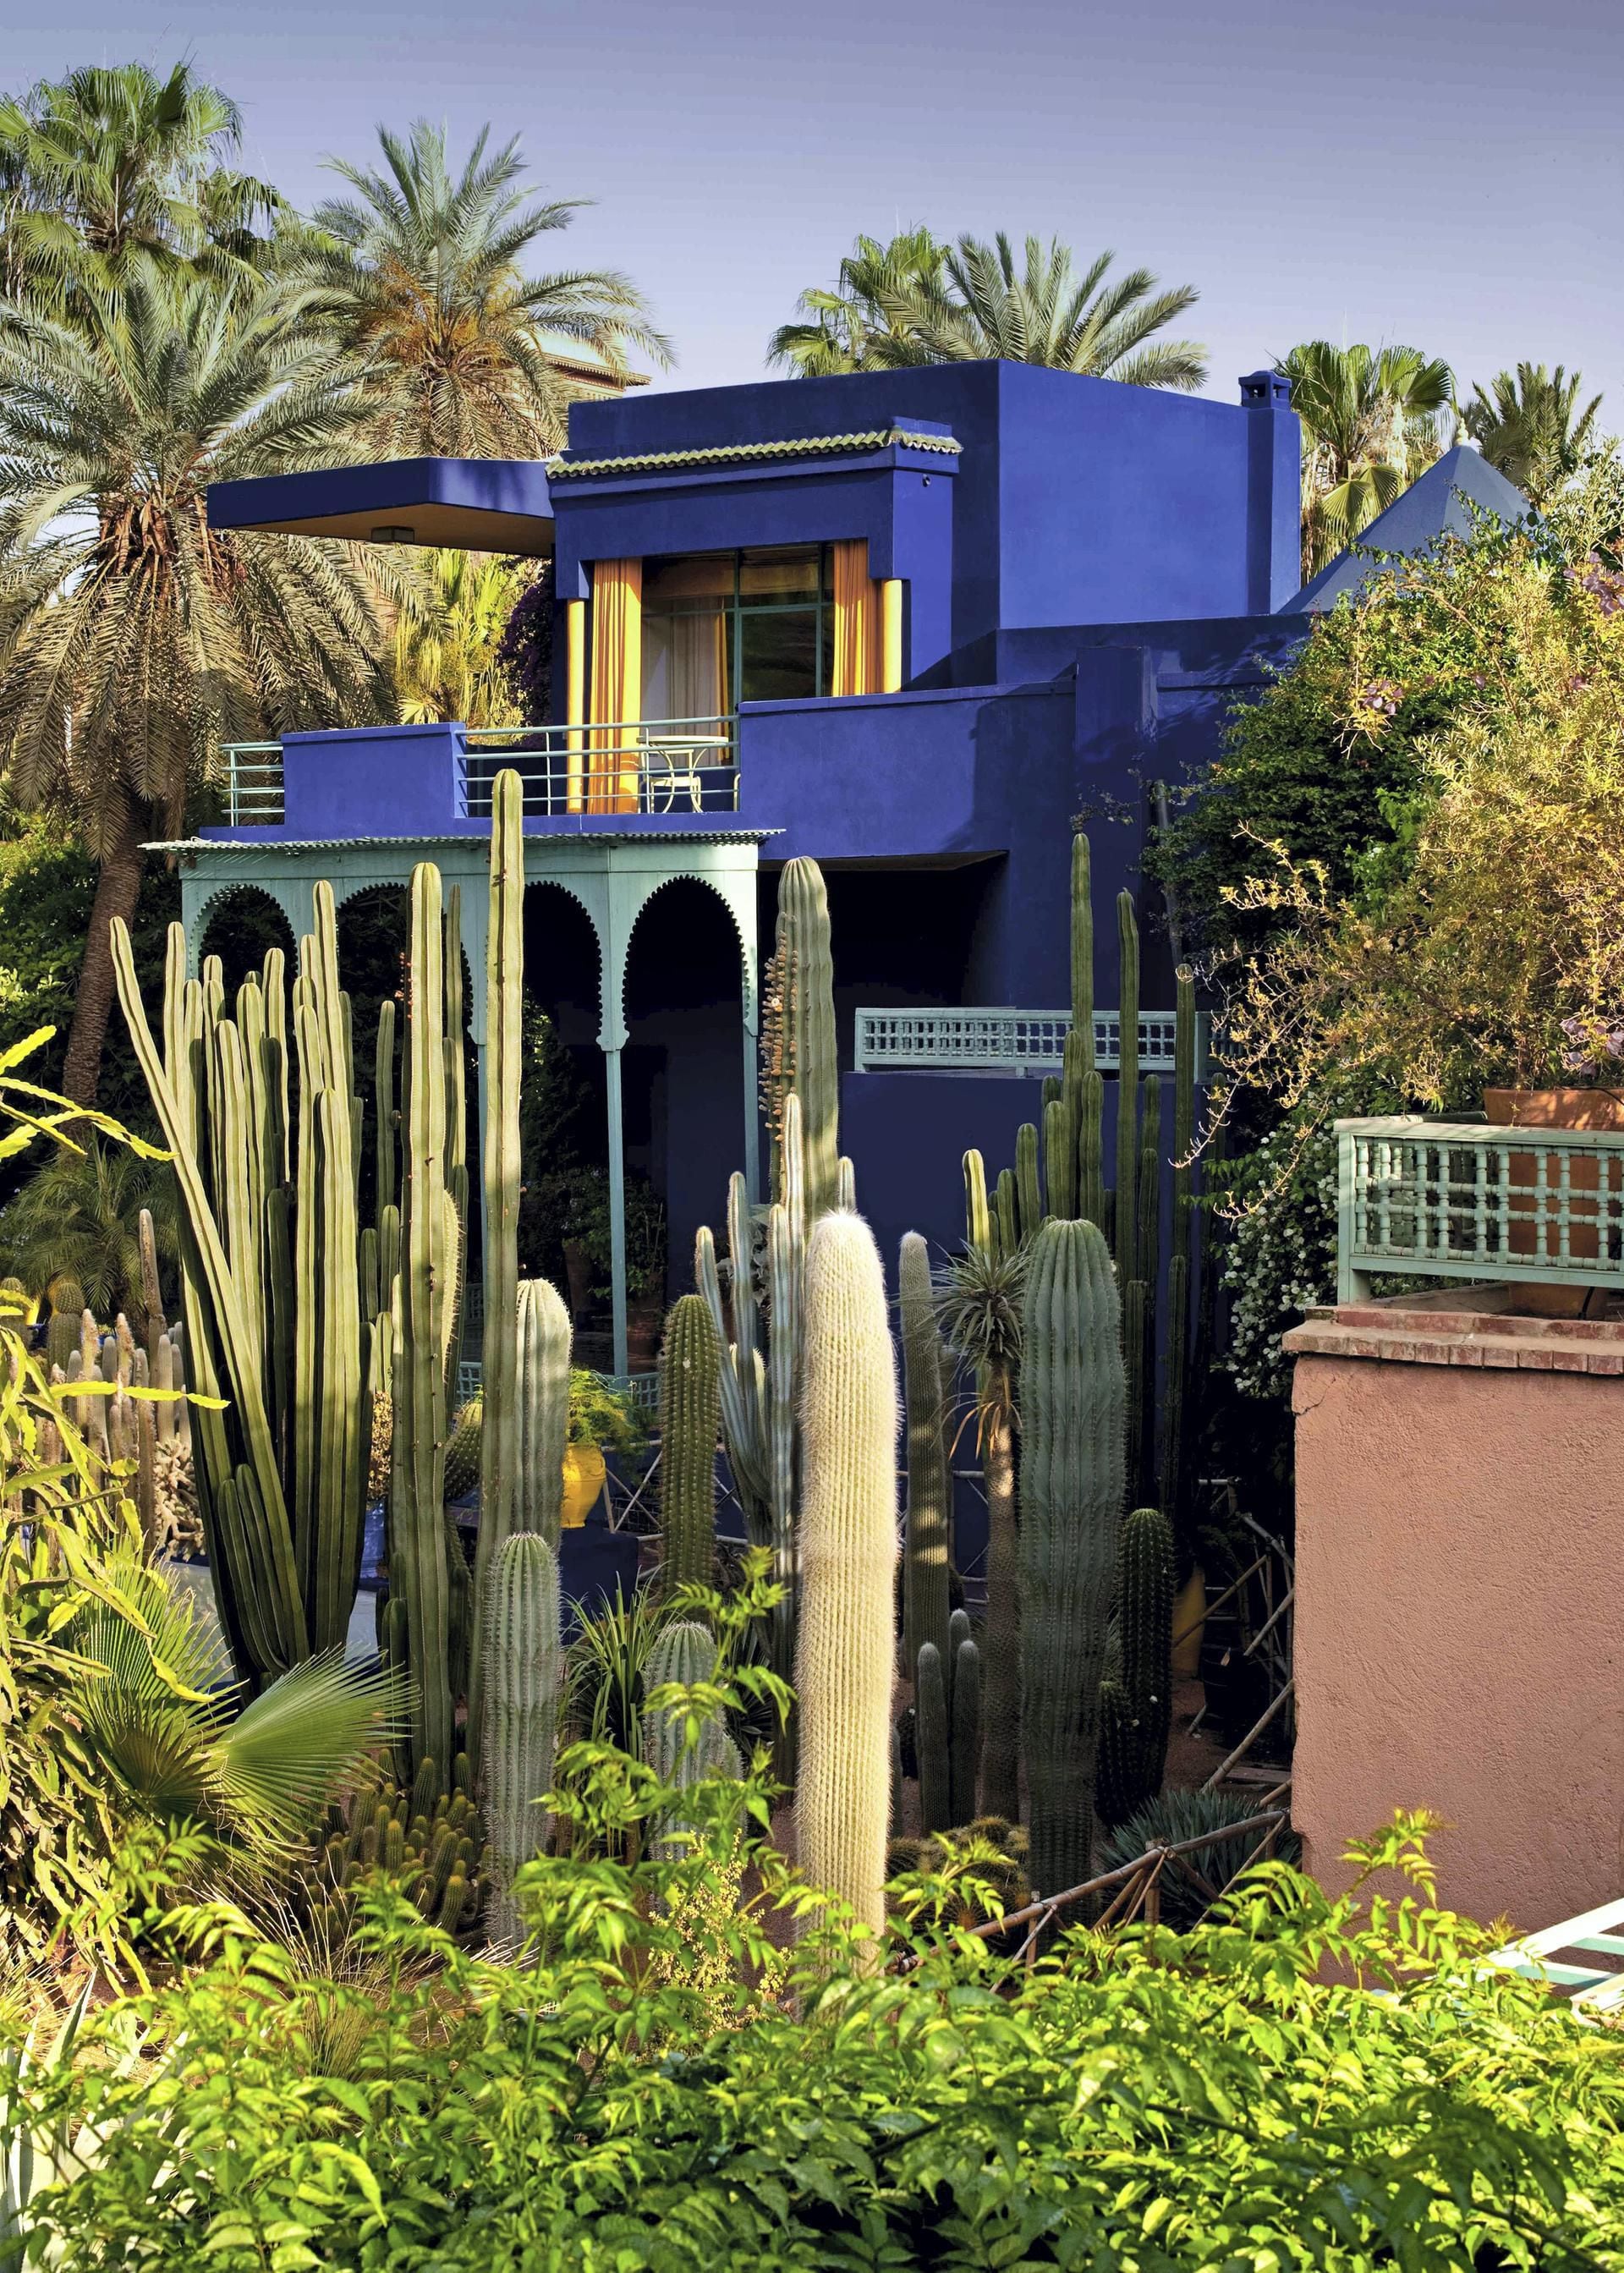 Villa Mabrouka: Yves Saint Laurent's Morocco home has a new owner